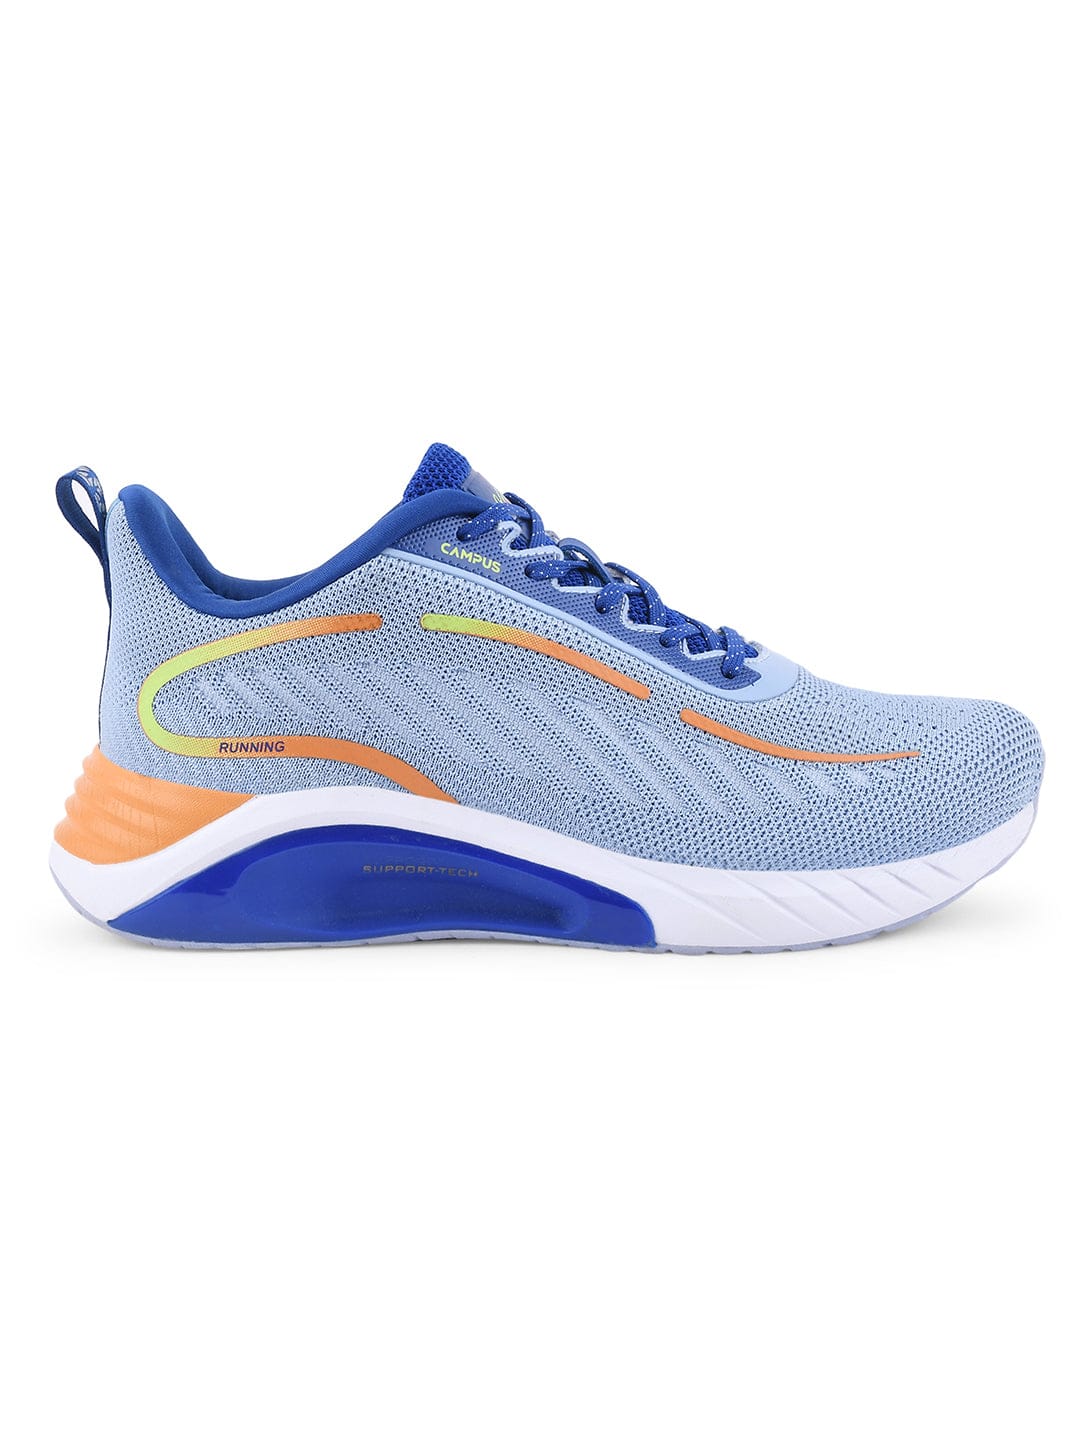 Buy ABACUS Blue Men's Running Shoes online | Campus Shoes